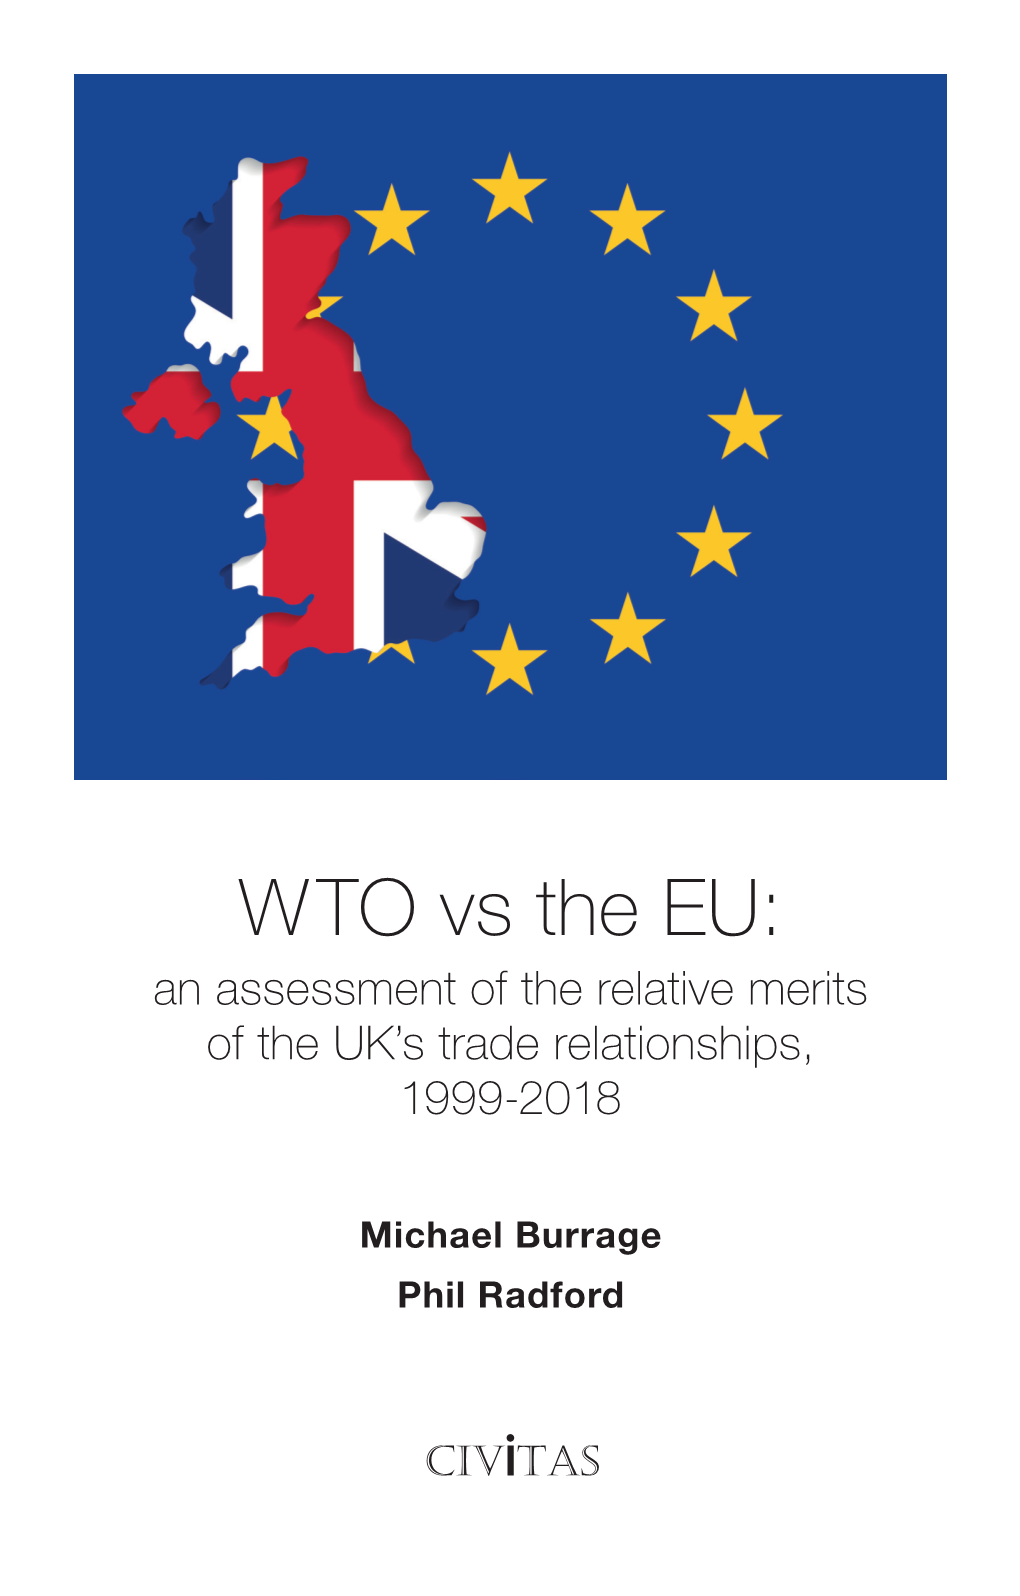 WTO Vs the EU: an Assessment of the Relative Merits of the UK’S Trade Relationships, 1999-2018